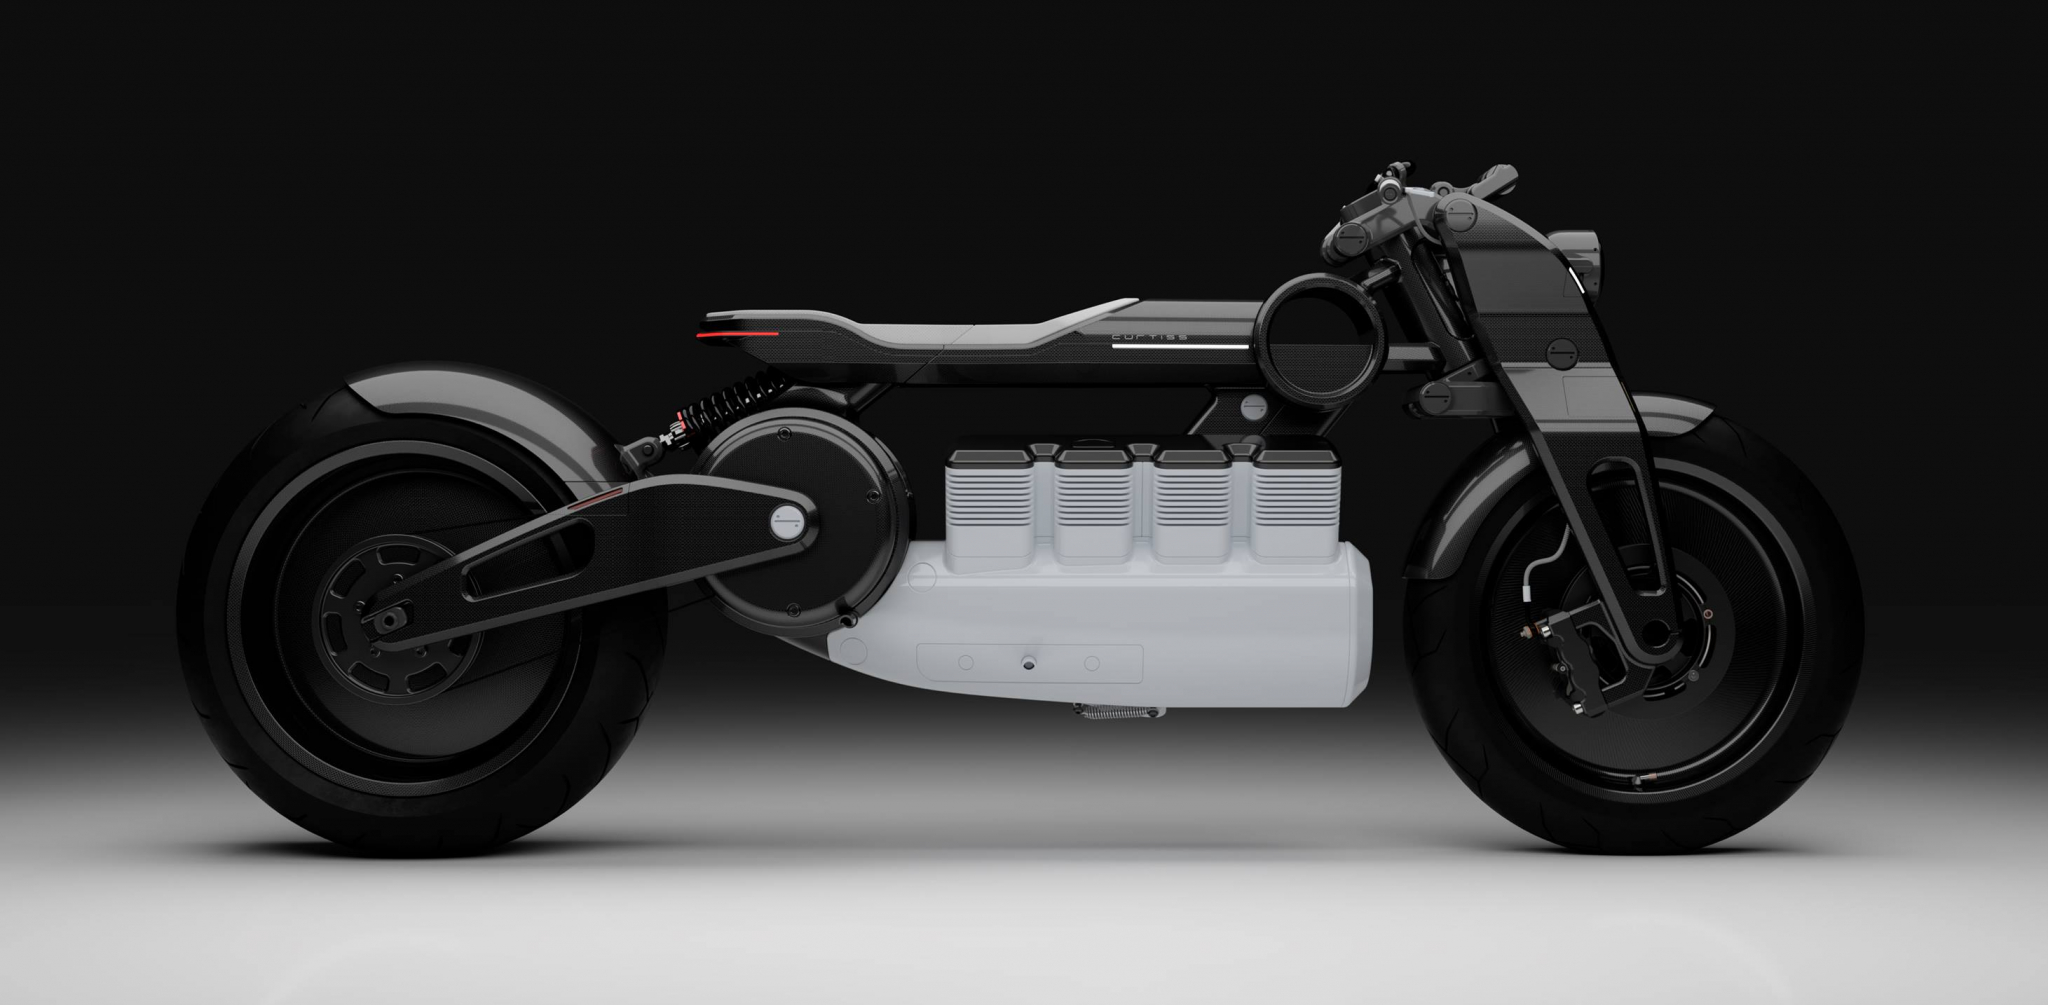 hera Curtiss Motorcycles has launched a crowdsourcing campaign for electric motorcycles